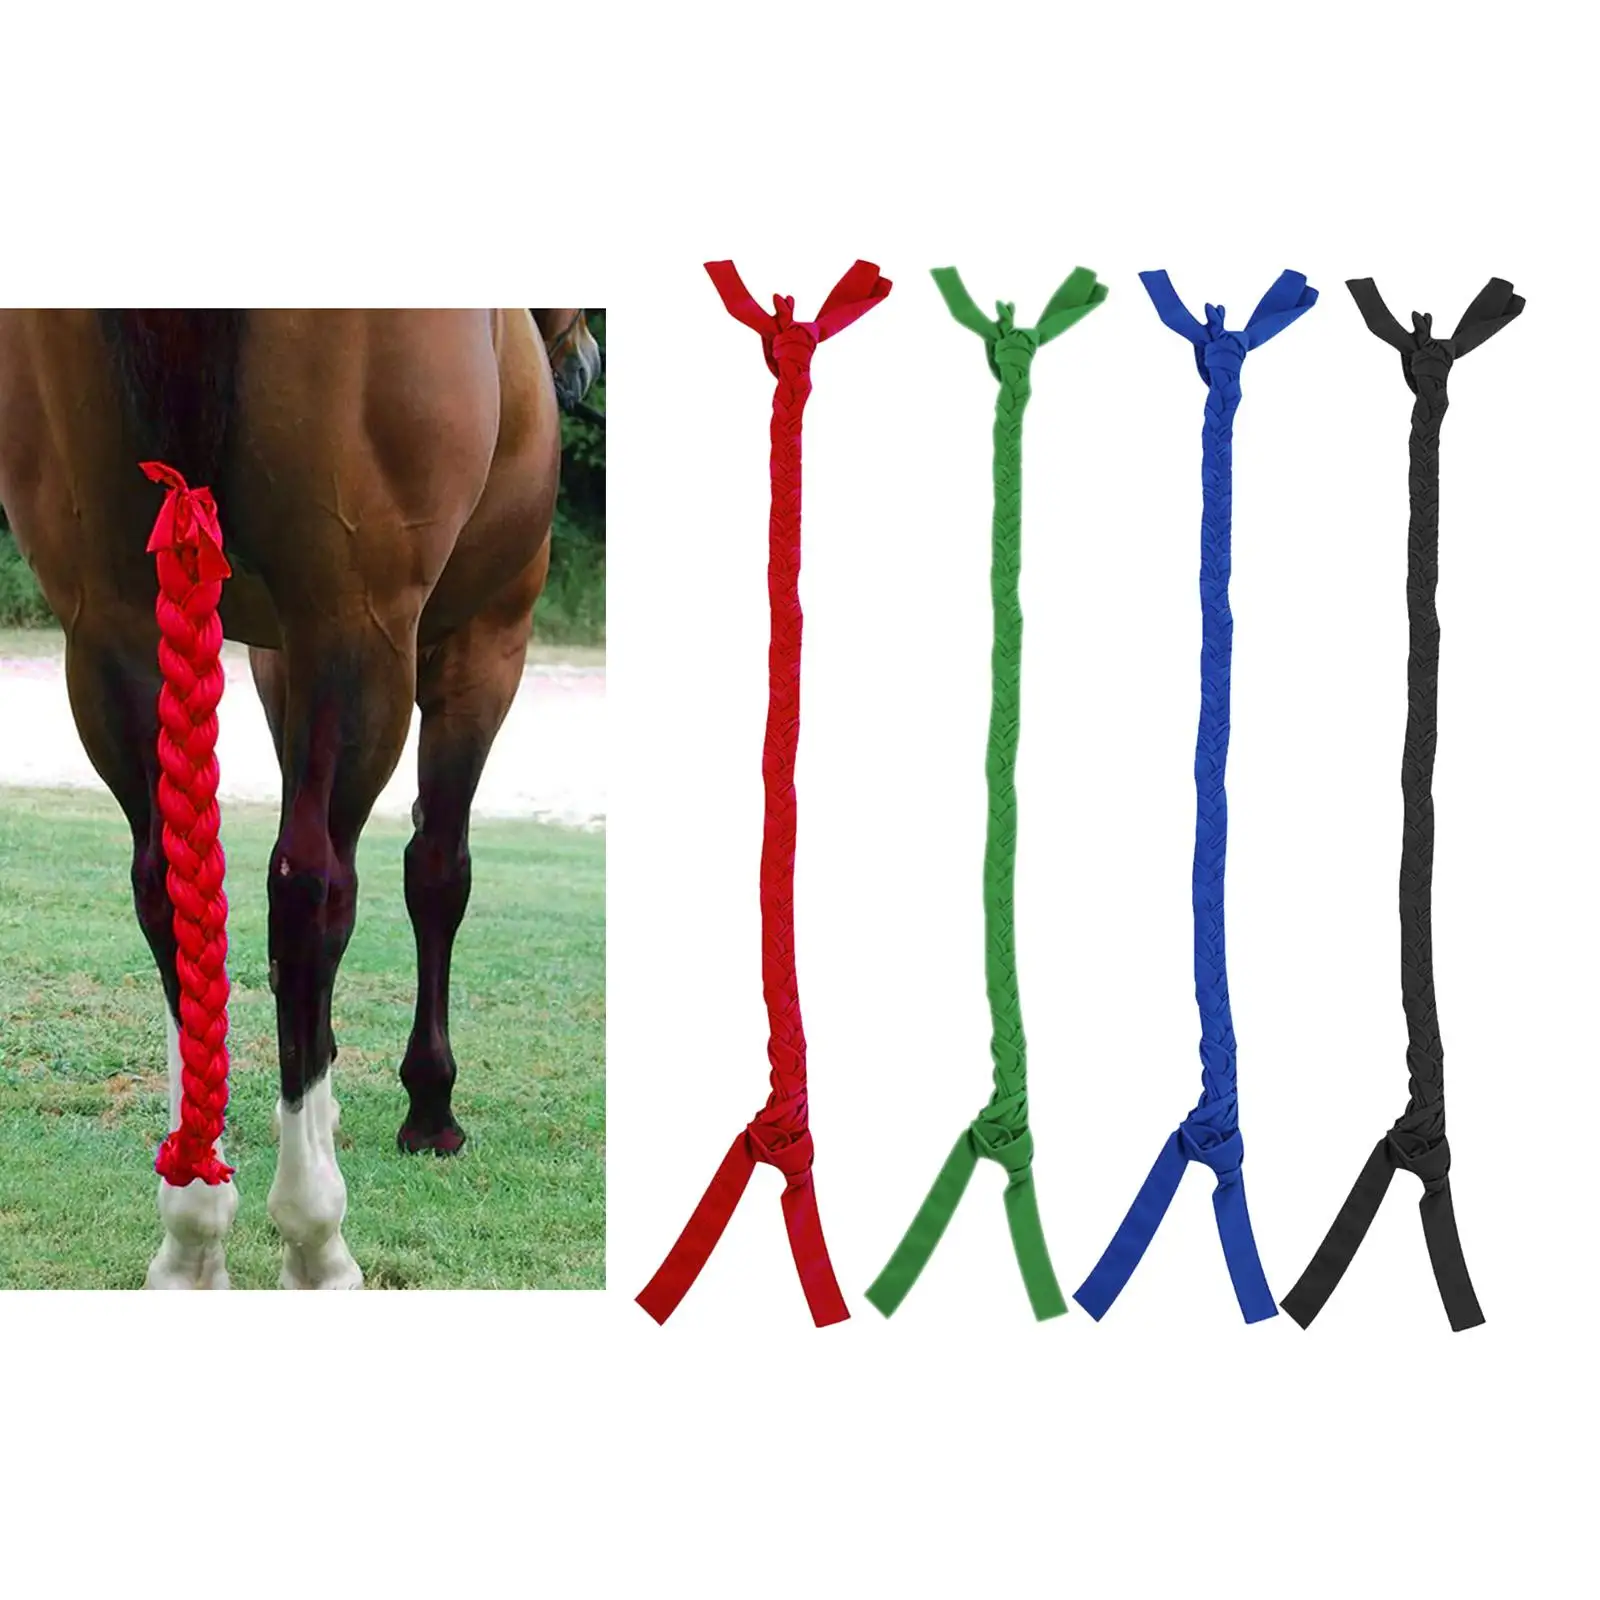 Equestrian Horse Waterproof Tail Bag 3 Tube Horse Care Horse Tail Braid Solids Horse Tail Decoration Accessories